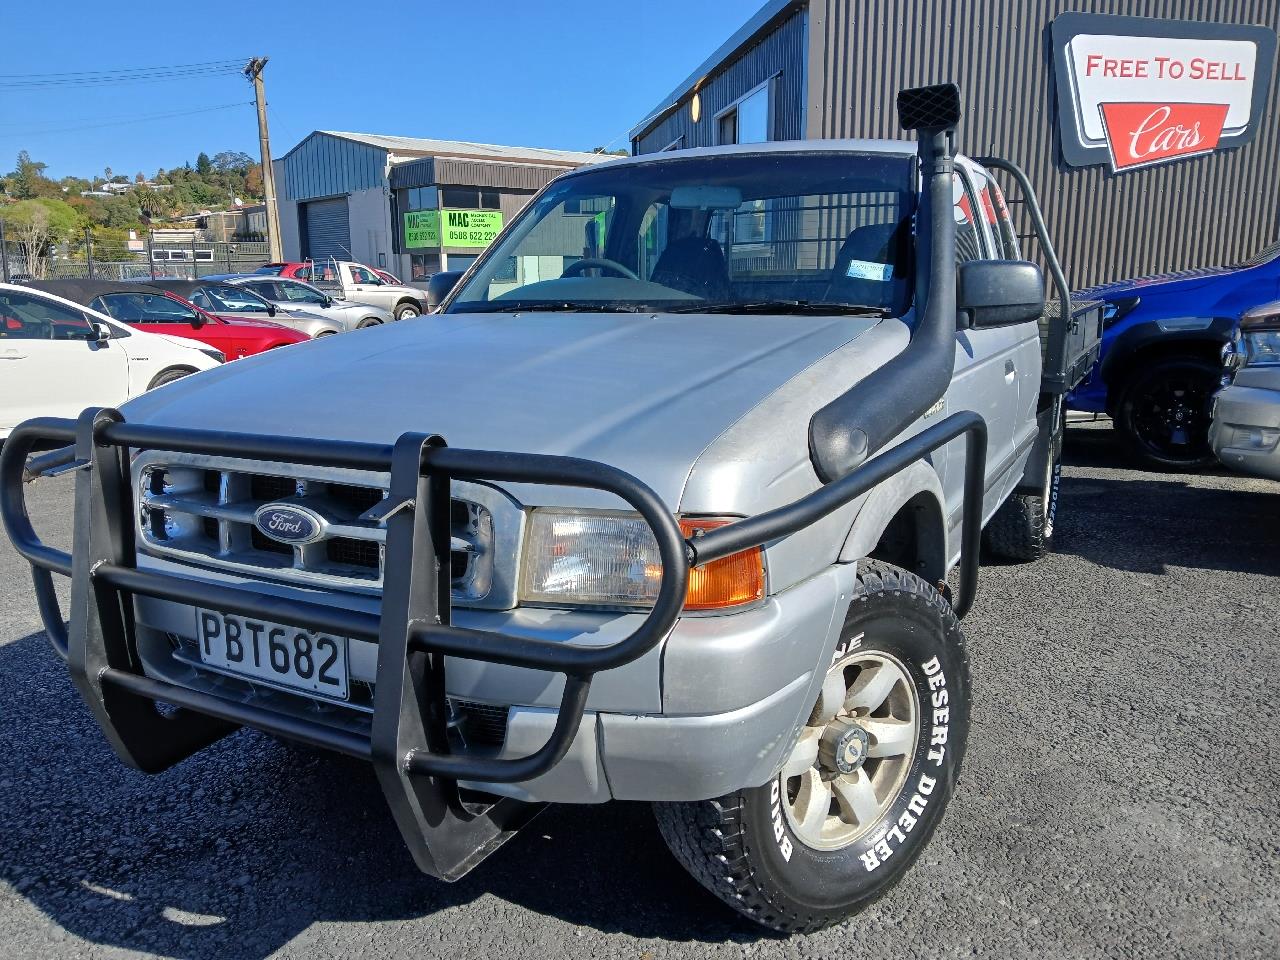 2001 Ford Courier